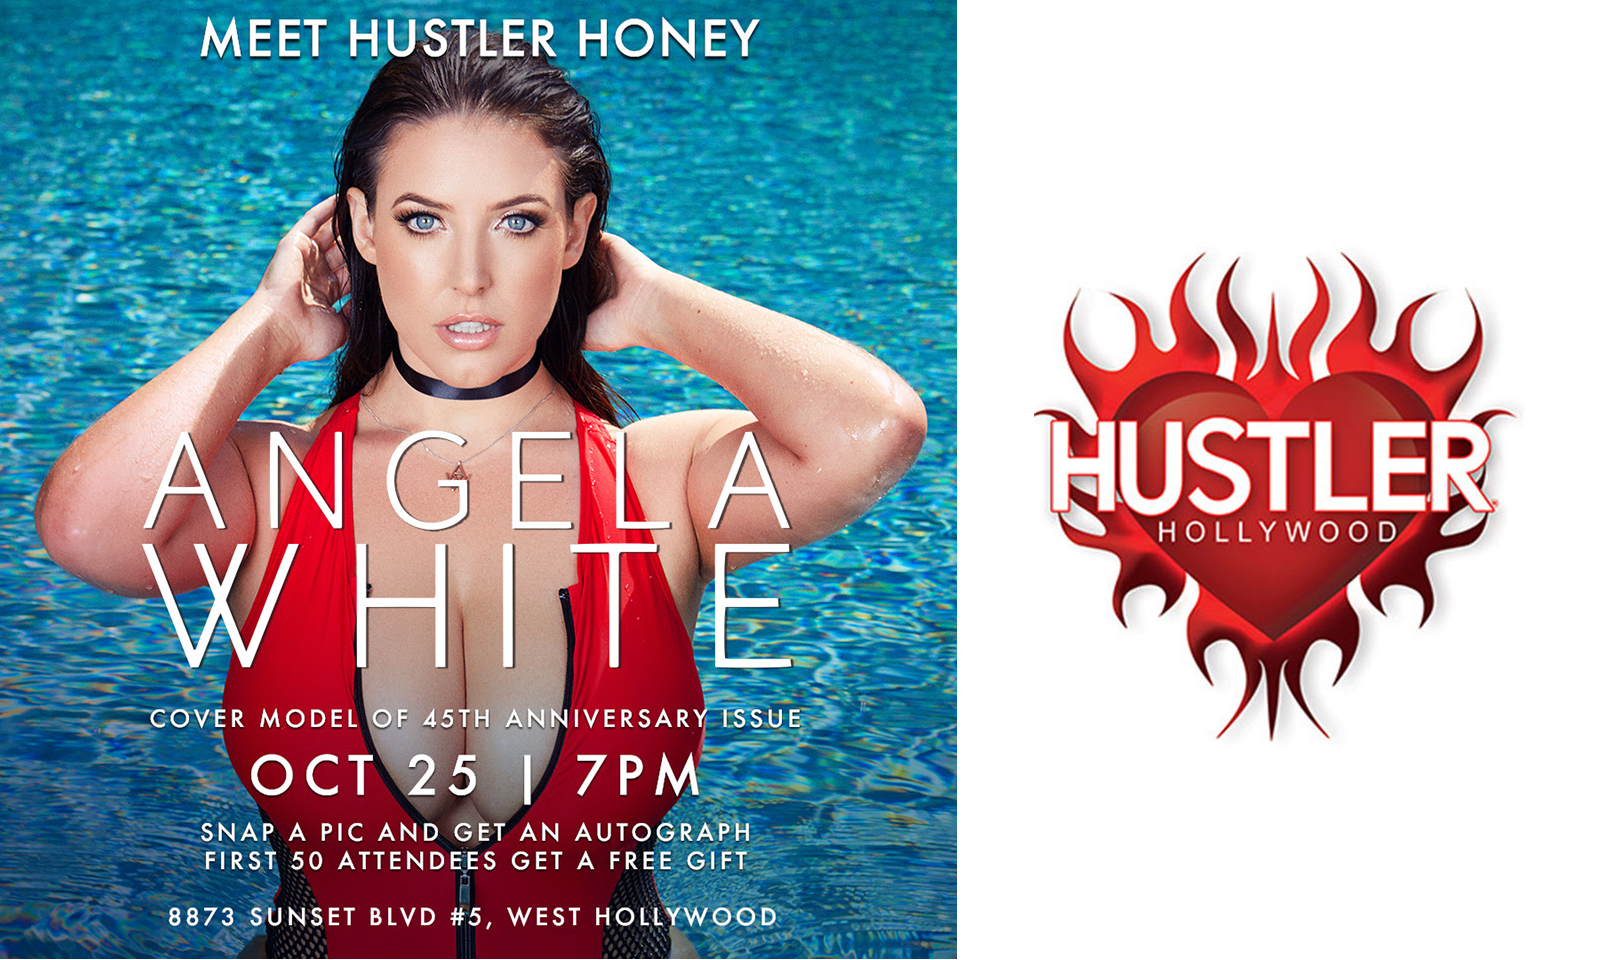 Angela White to Hold Fan Meet-and-Greet at Hustler Hollywood